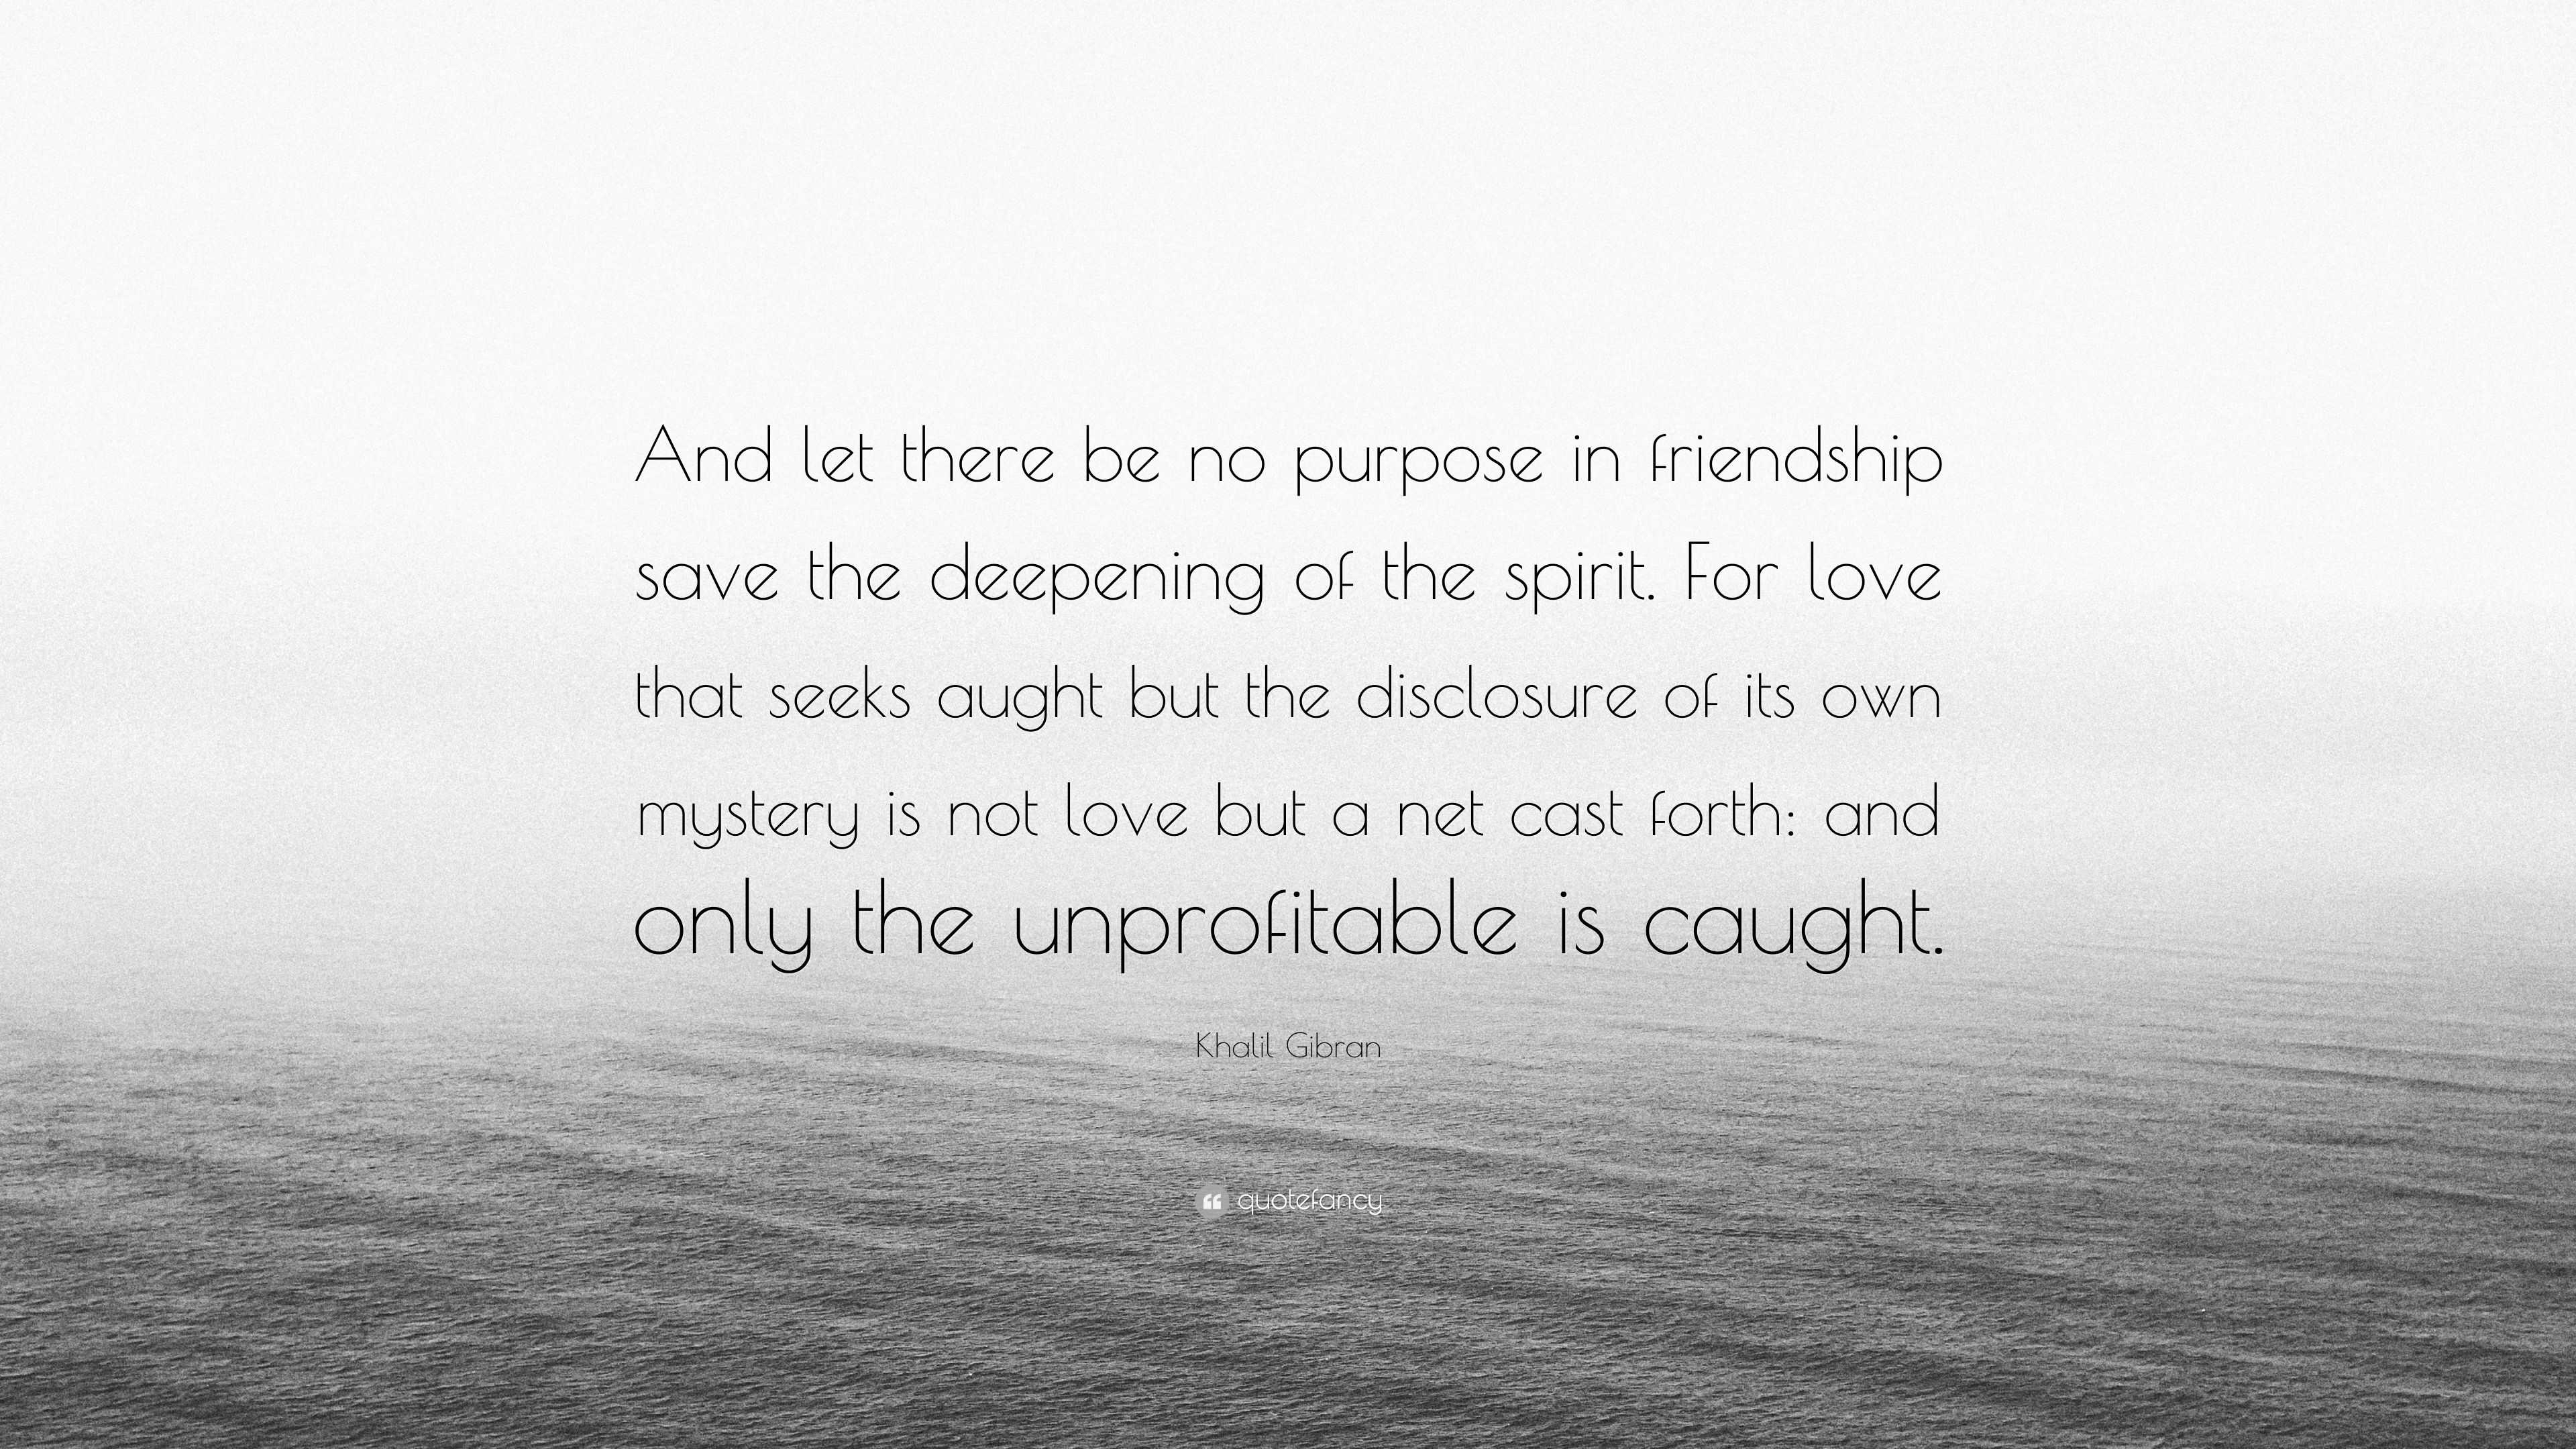 Khalil Gibran Quote: “And let there be no purpose in friendship save